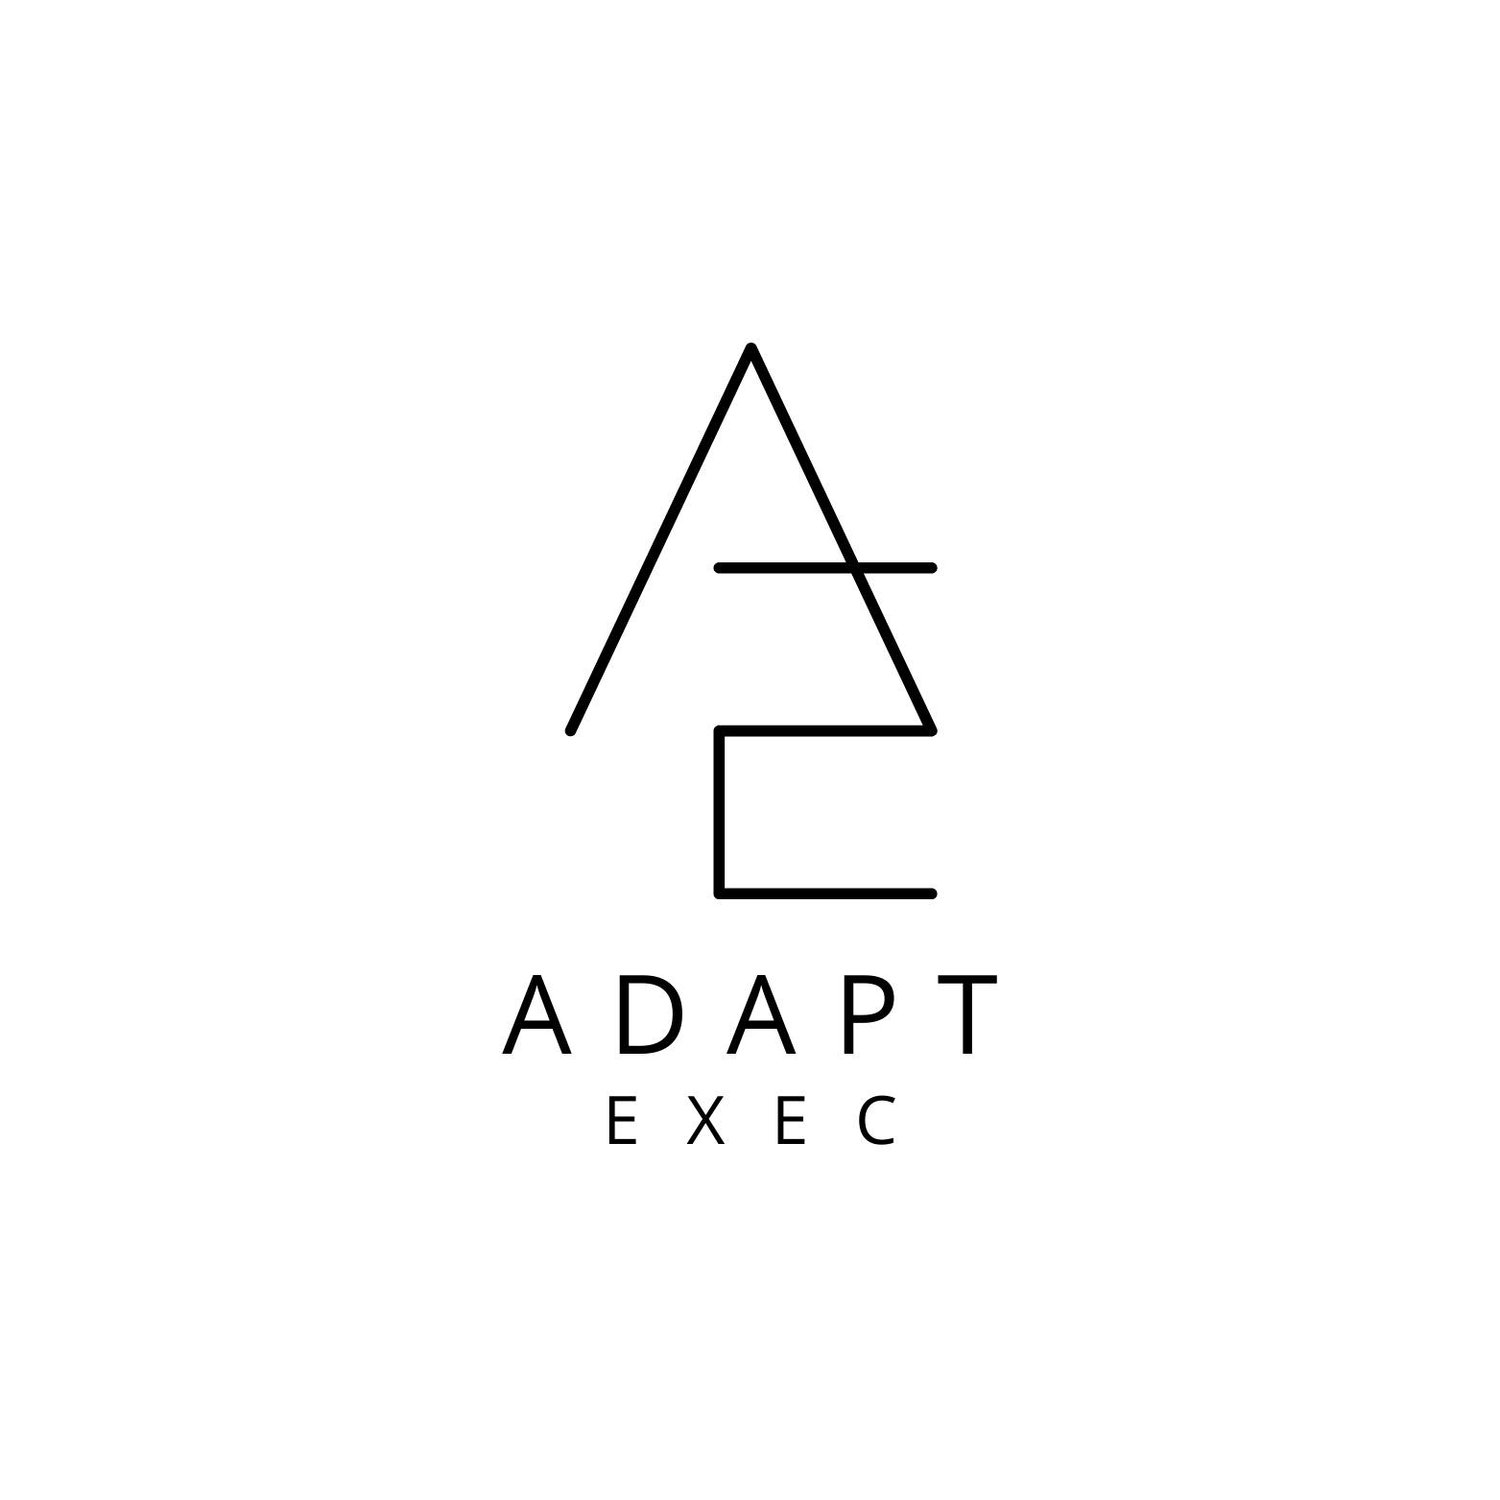 AdaptExec - Your Personal Assistant